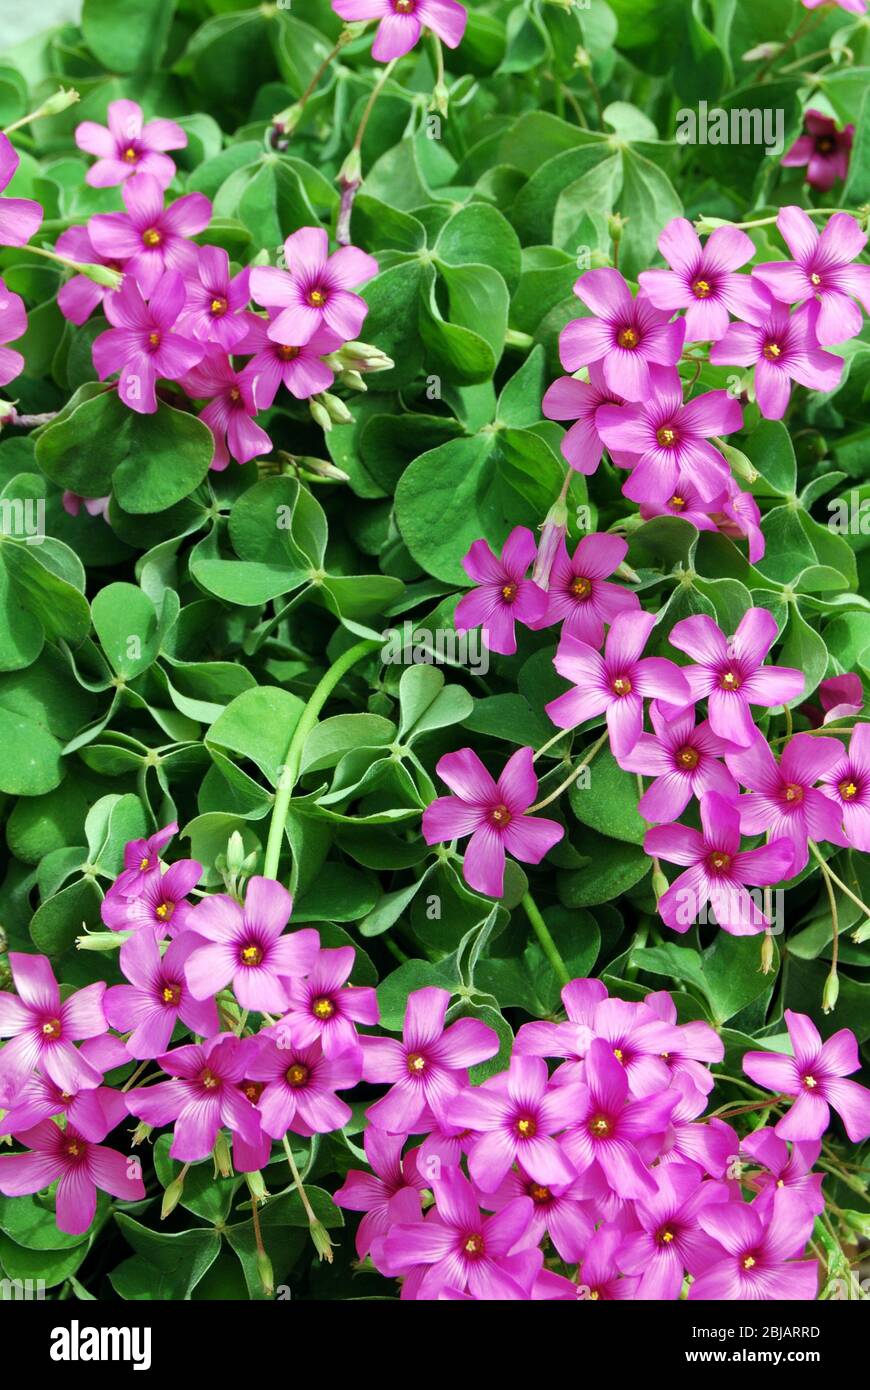 Pink flowering Oxalis plant, Costa del Sol, Malaga Province, Andalucia, Spain. Stock Photo